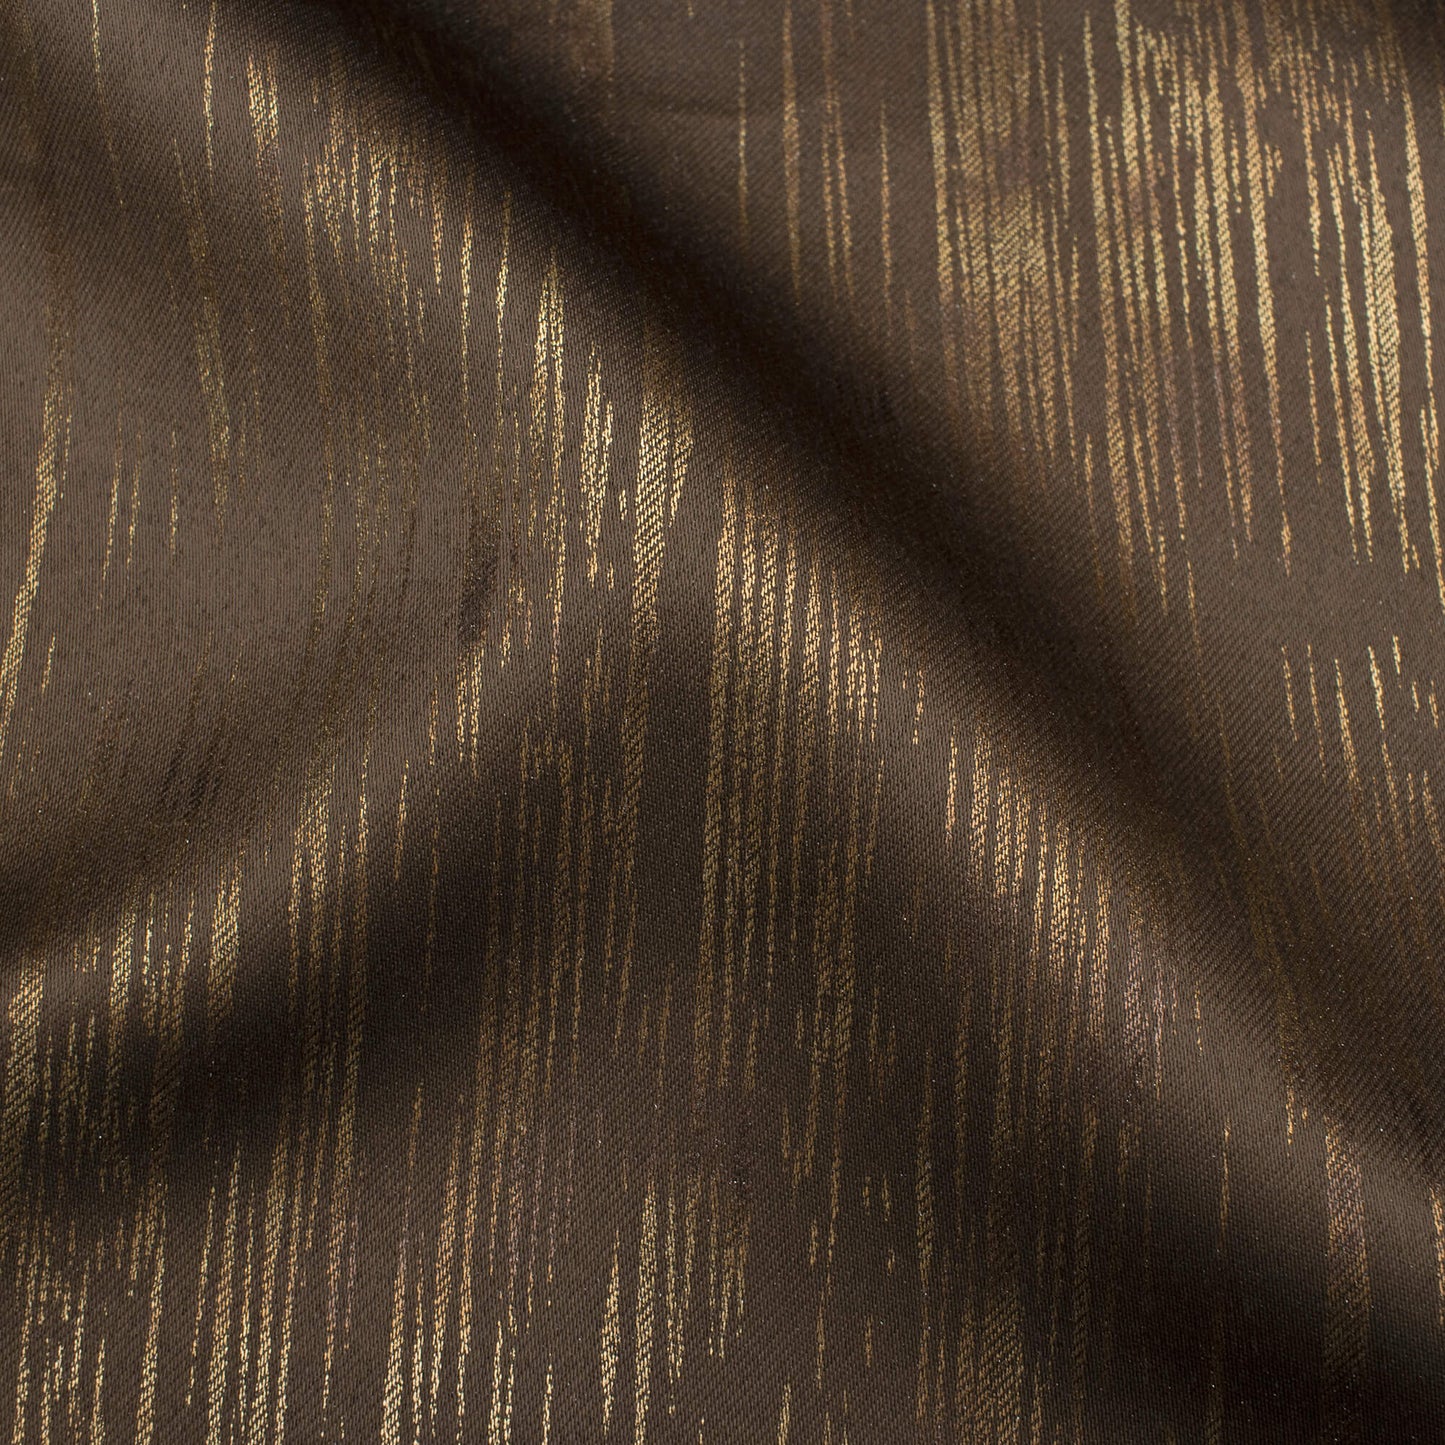 Umber Brown Textured Golden Foil Premium Curtain Fabric (Width 54 Inches)